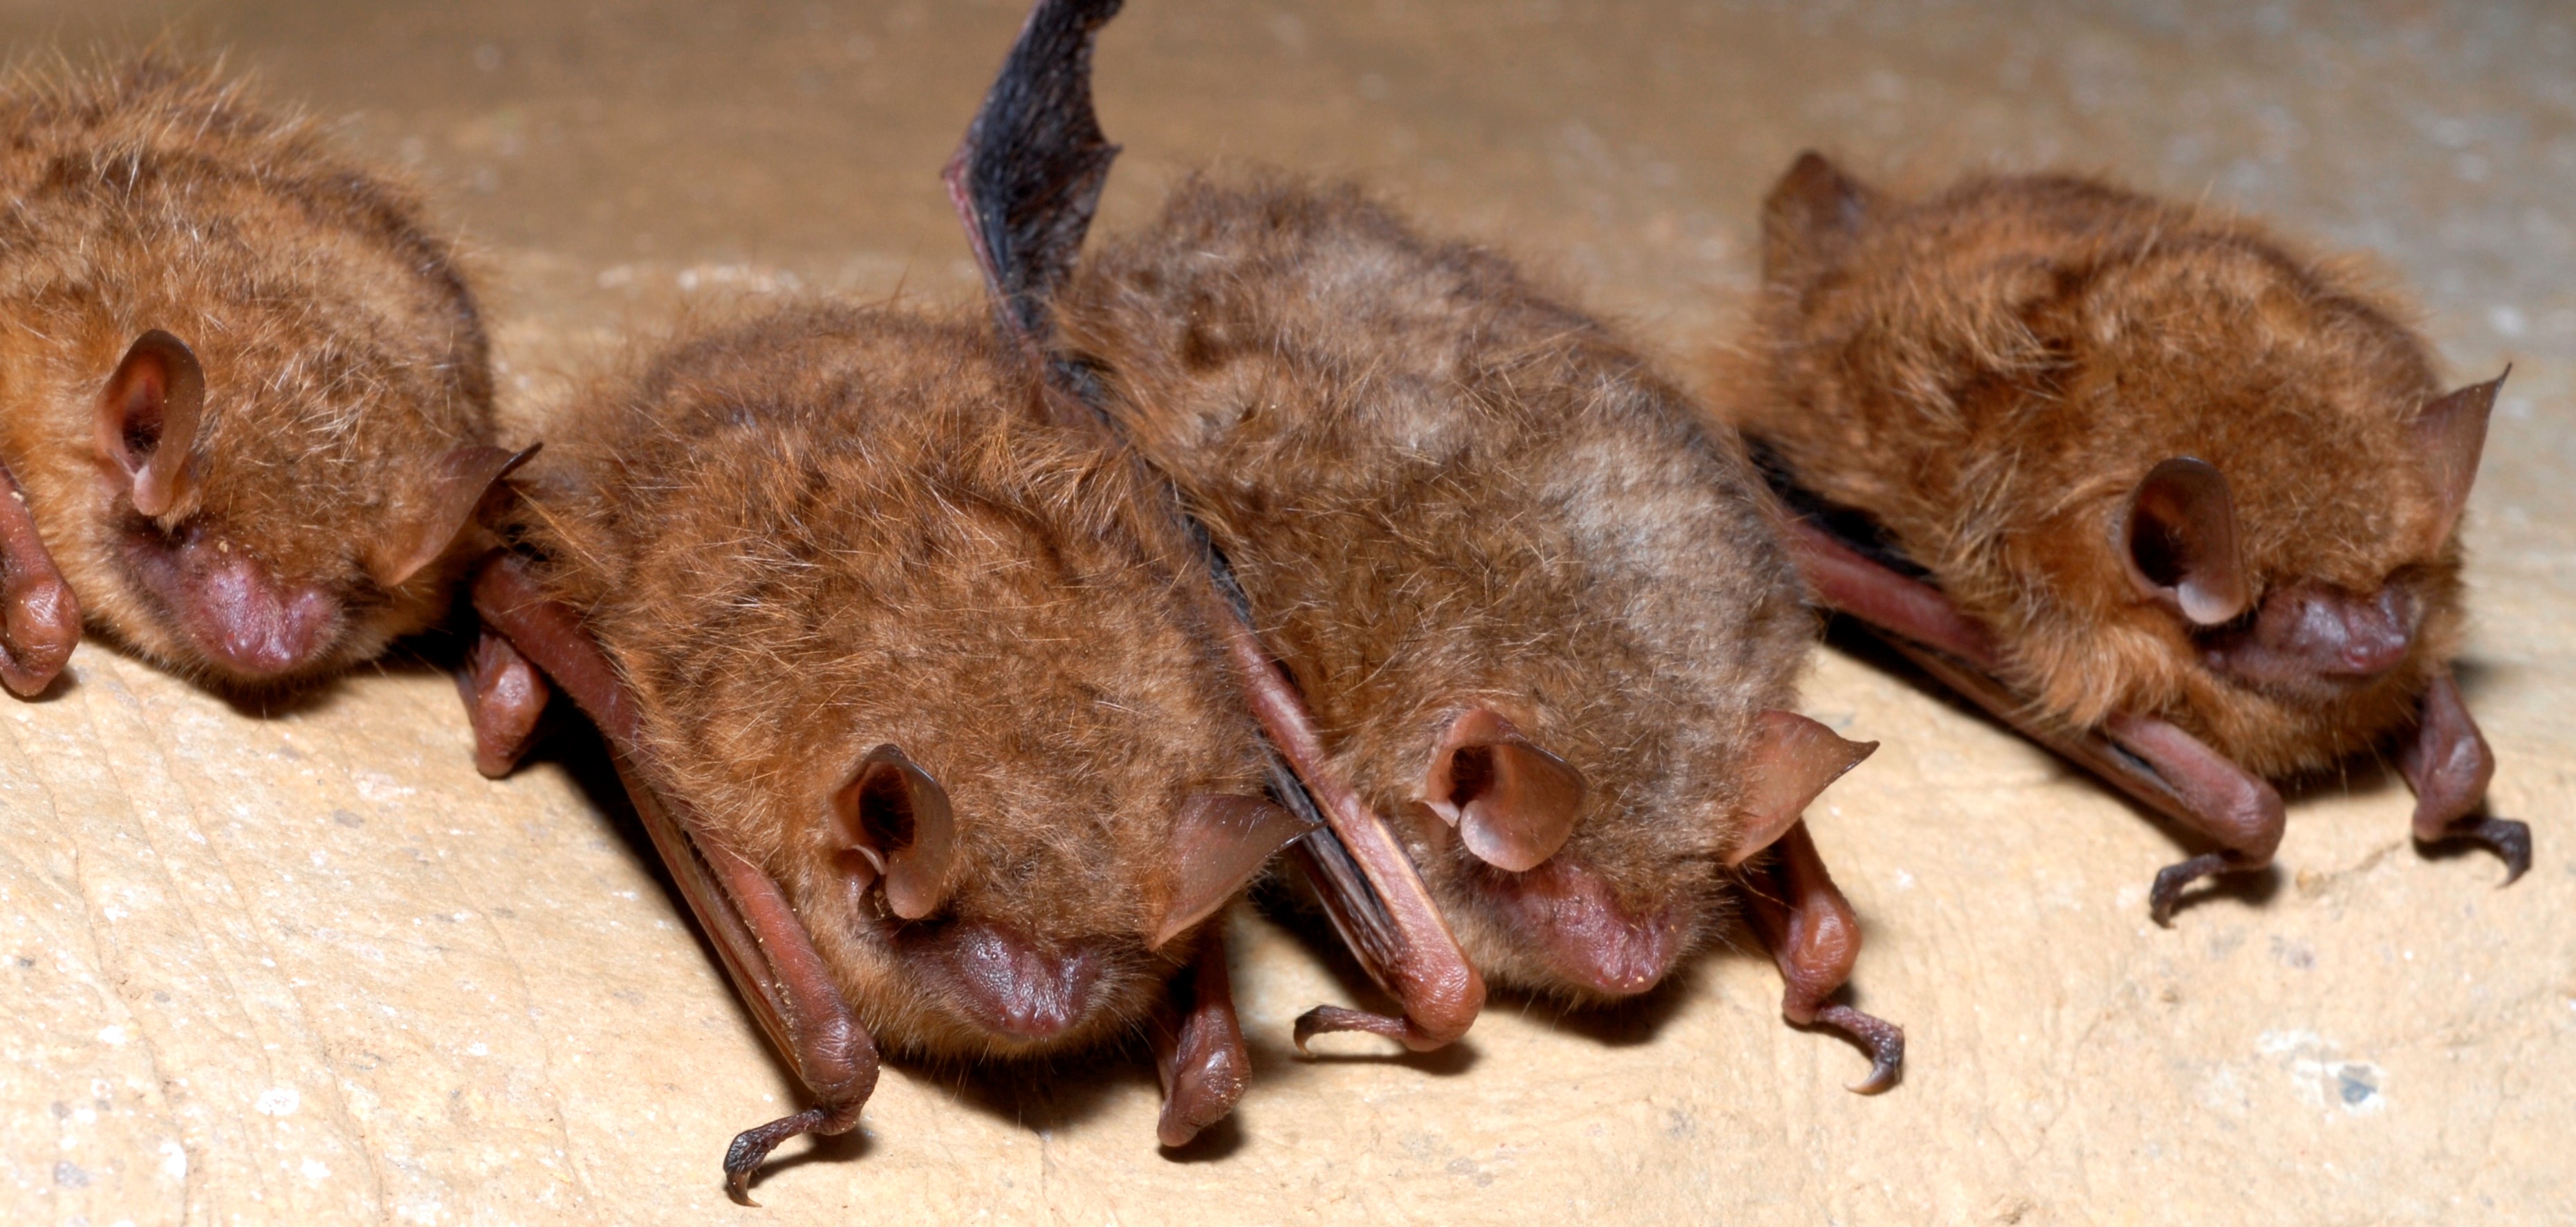 Small bats huddle next to each other on a cave wall.